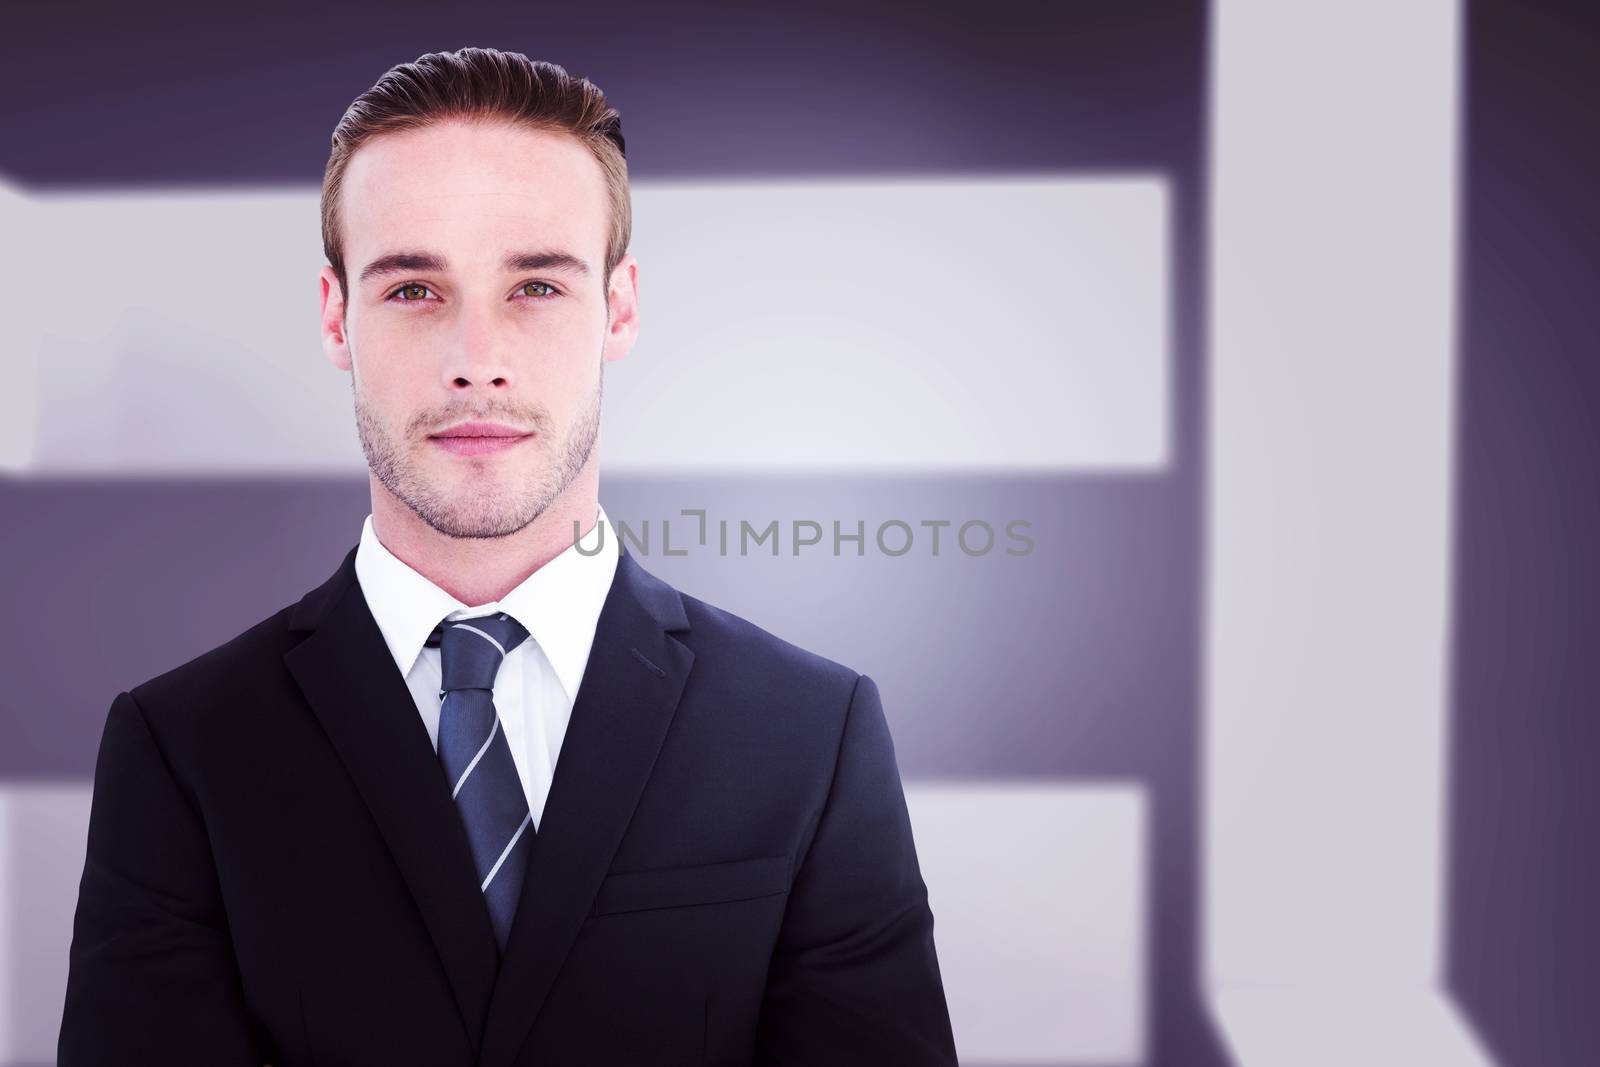 Frowning businessman looking at camera against abstract room